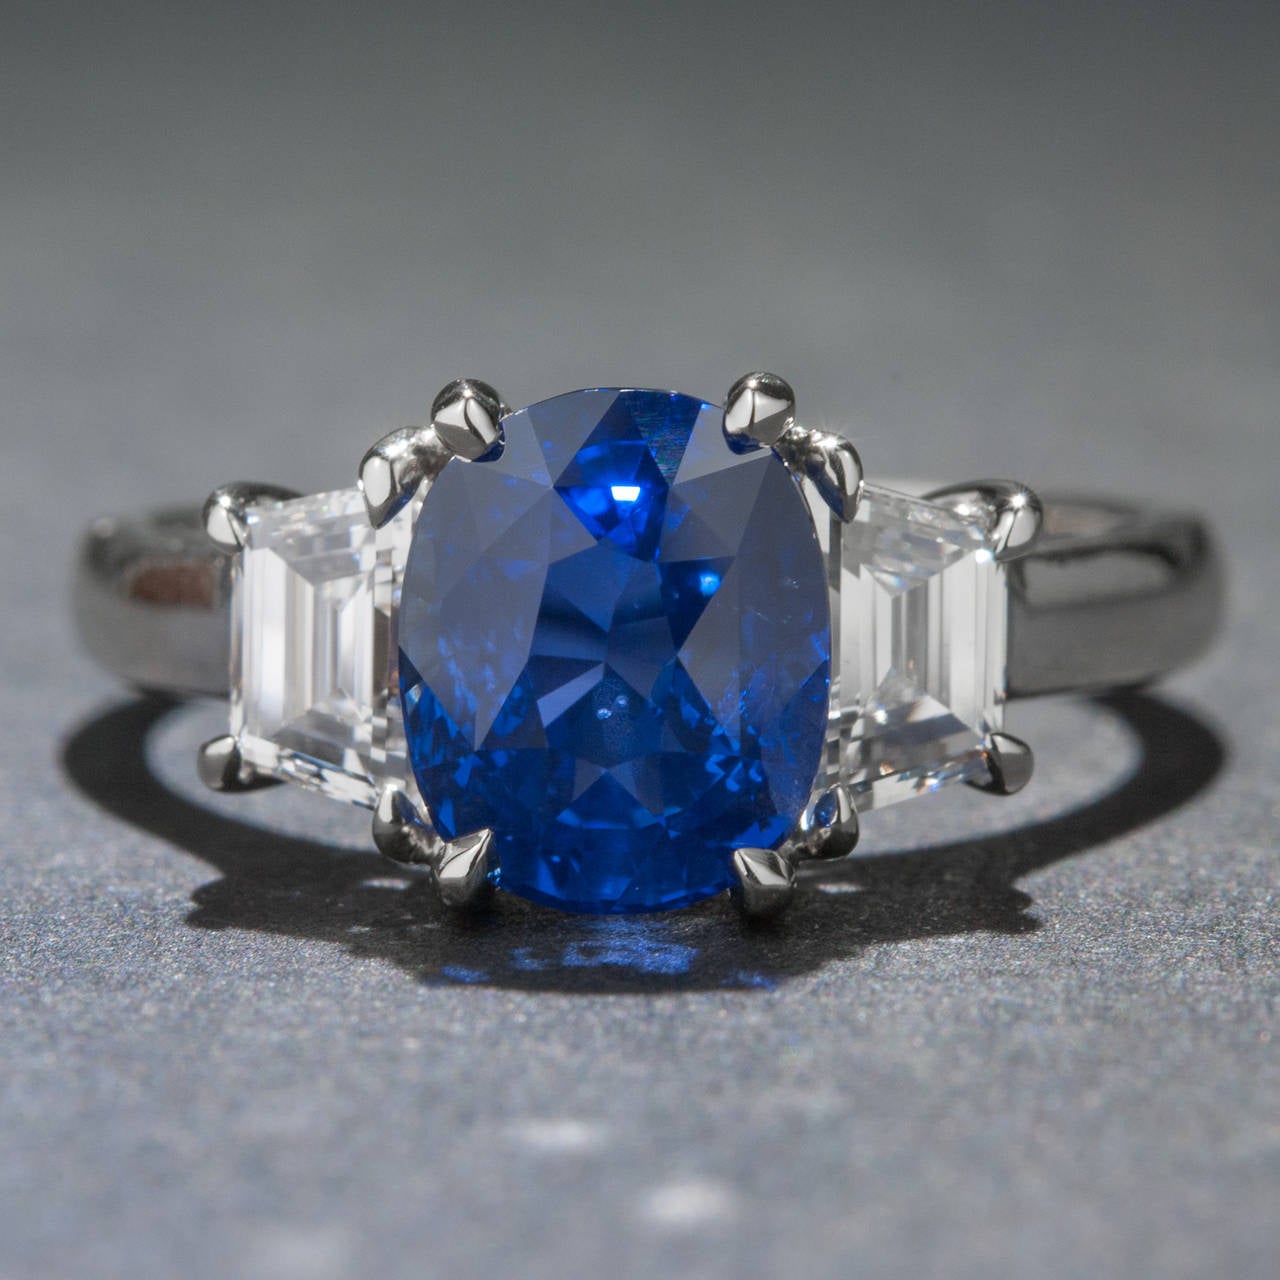 1960s 2.54 Carat Sapphire Diamond Ring In Excellent Condition For Sale In Carmel, CA